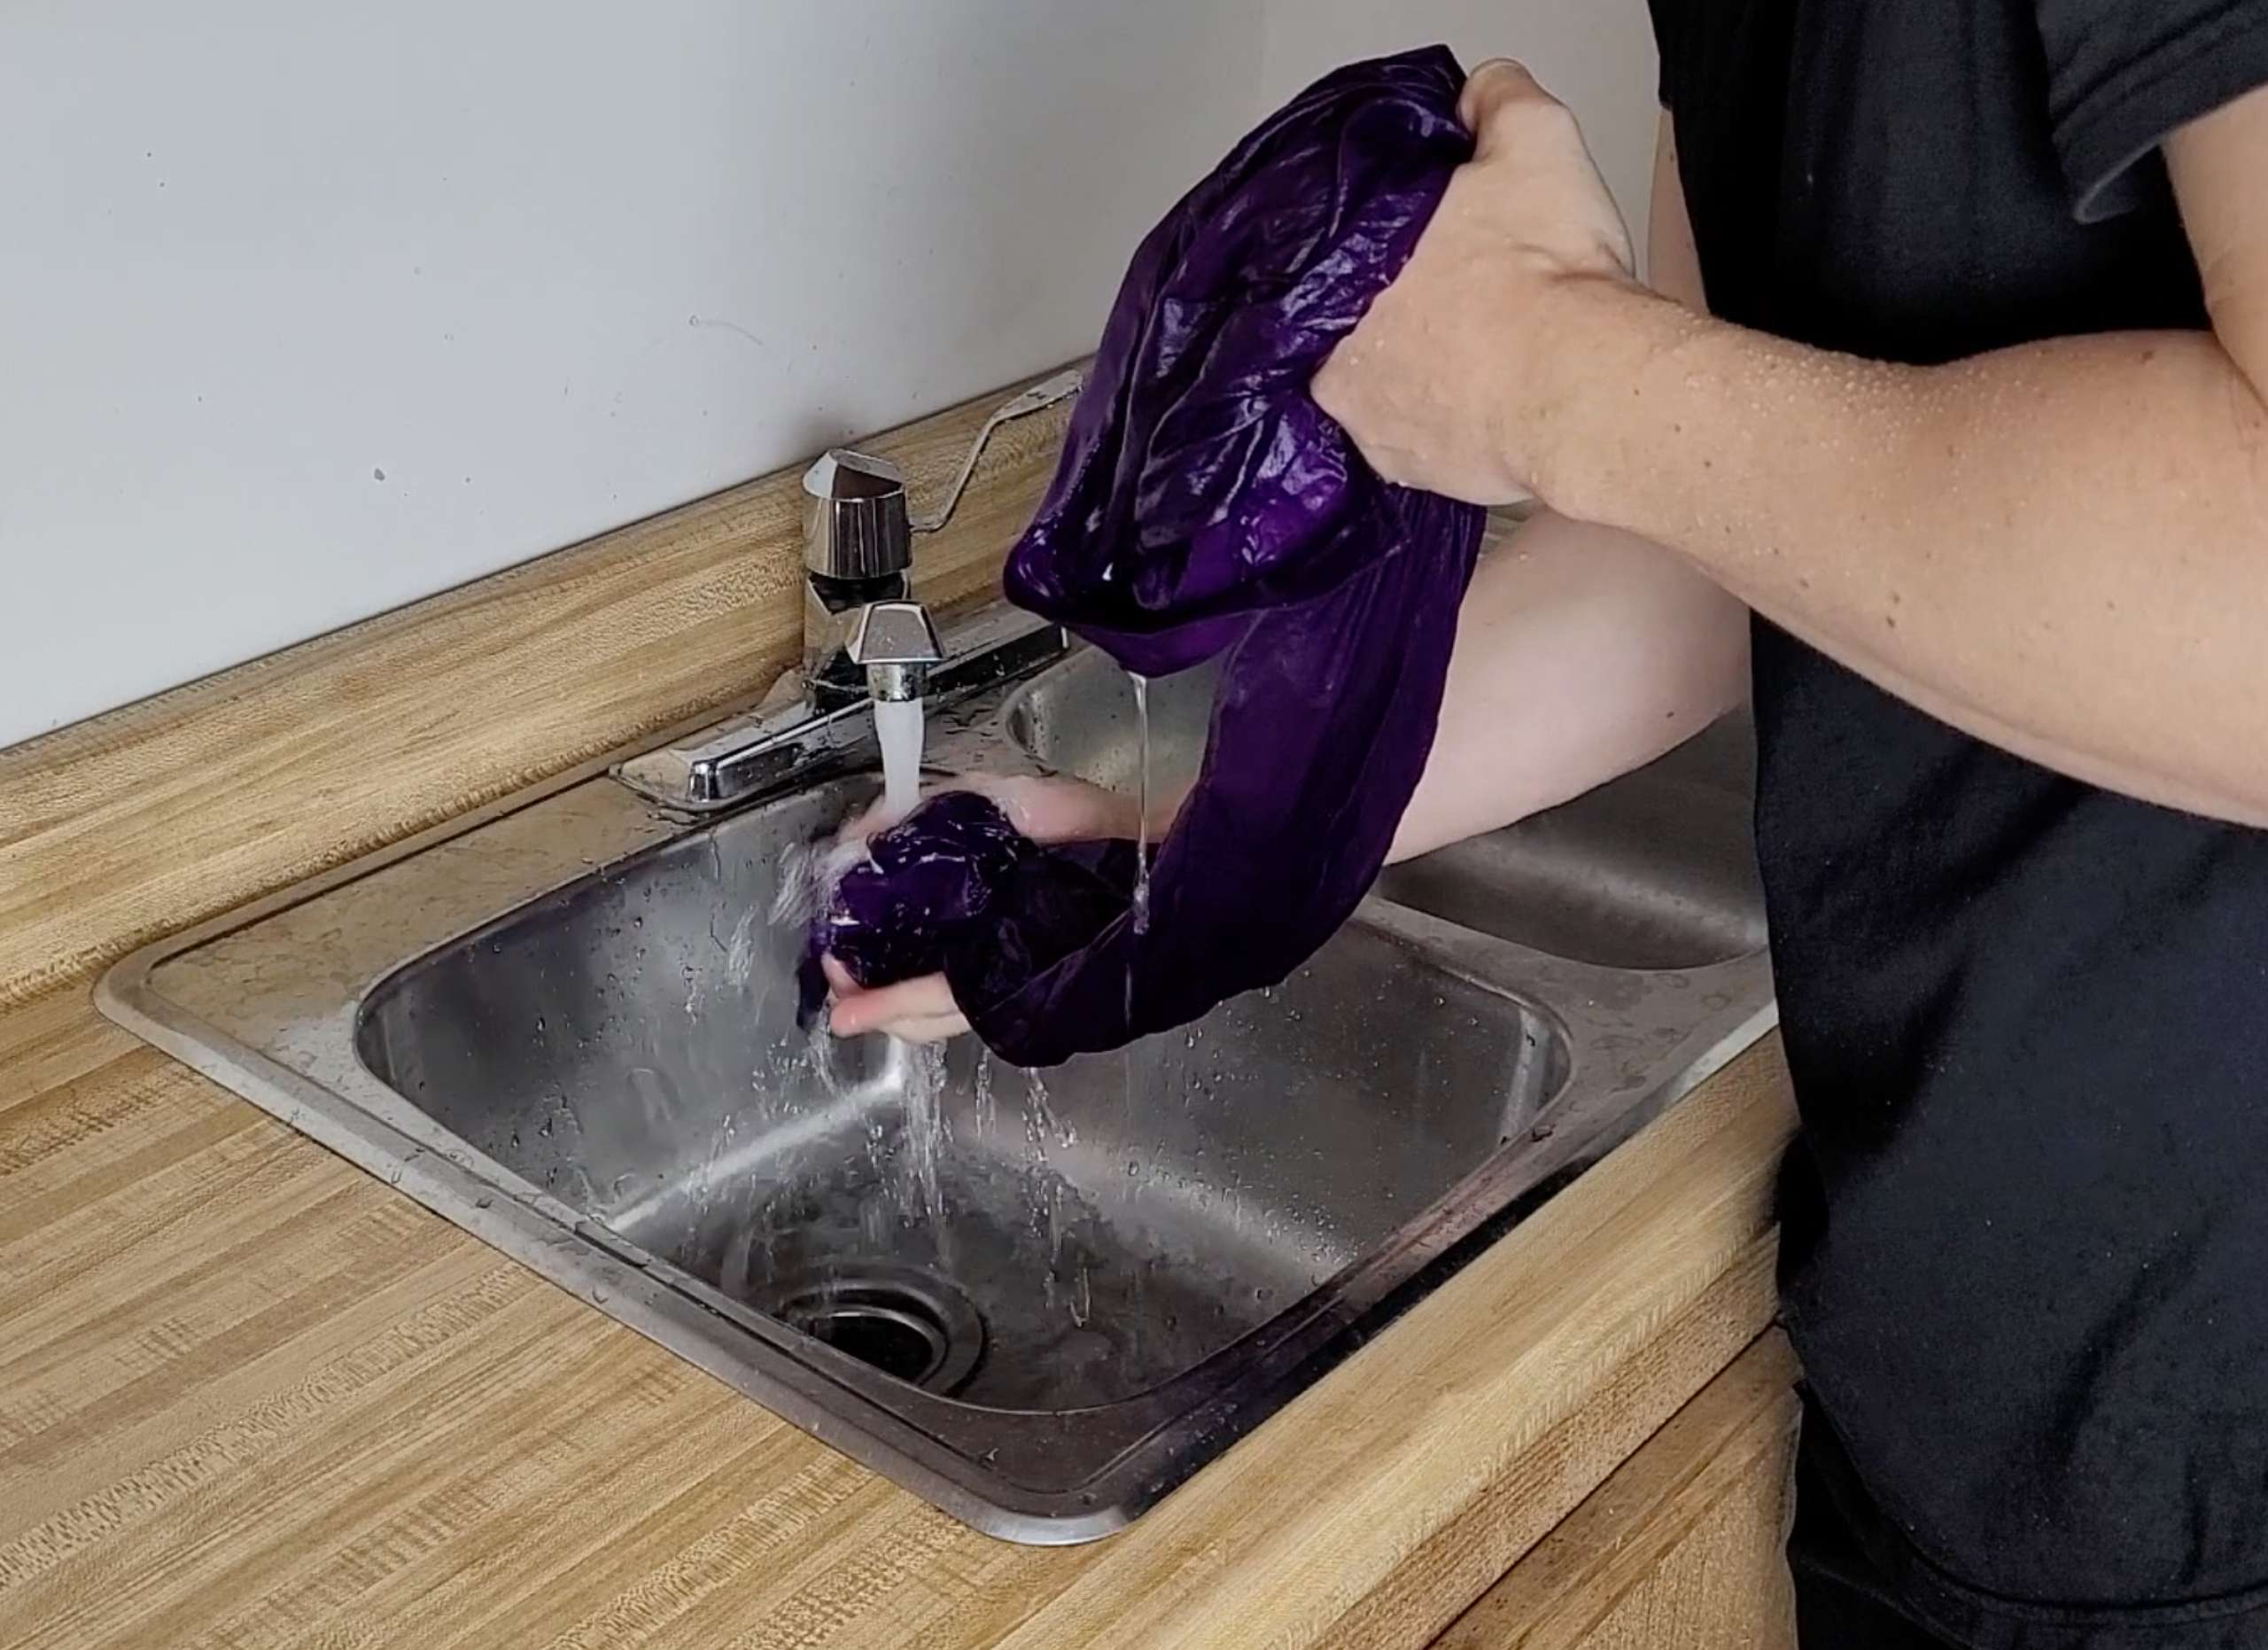 photo of a man rinsing a purple silk shirt under cold water in the sink